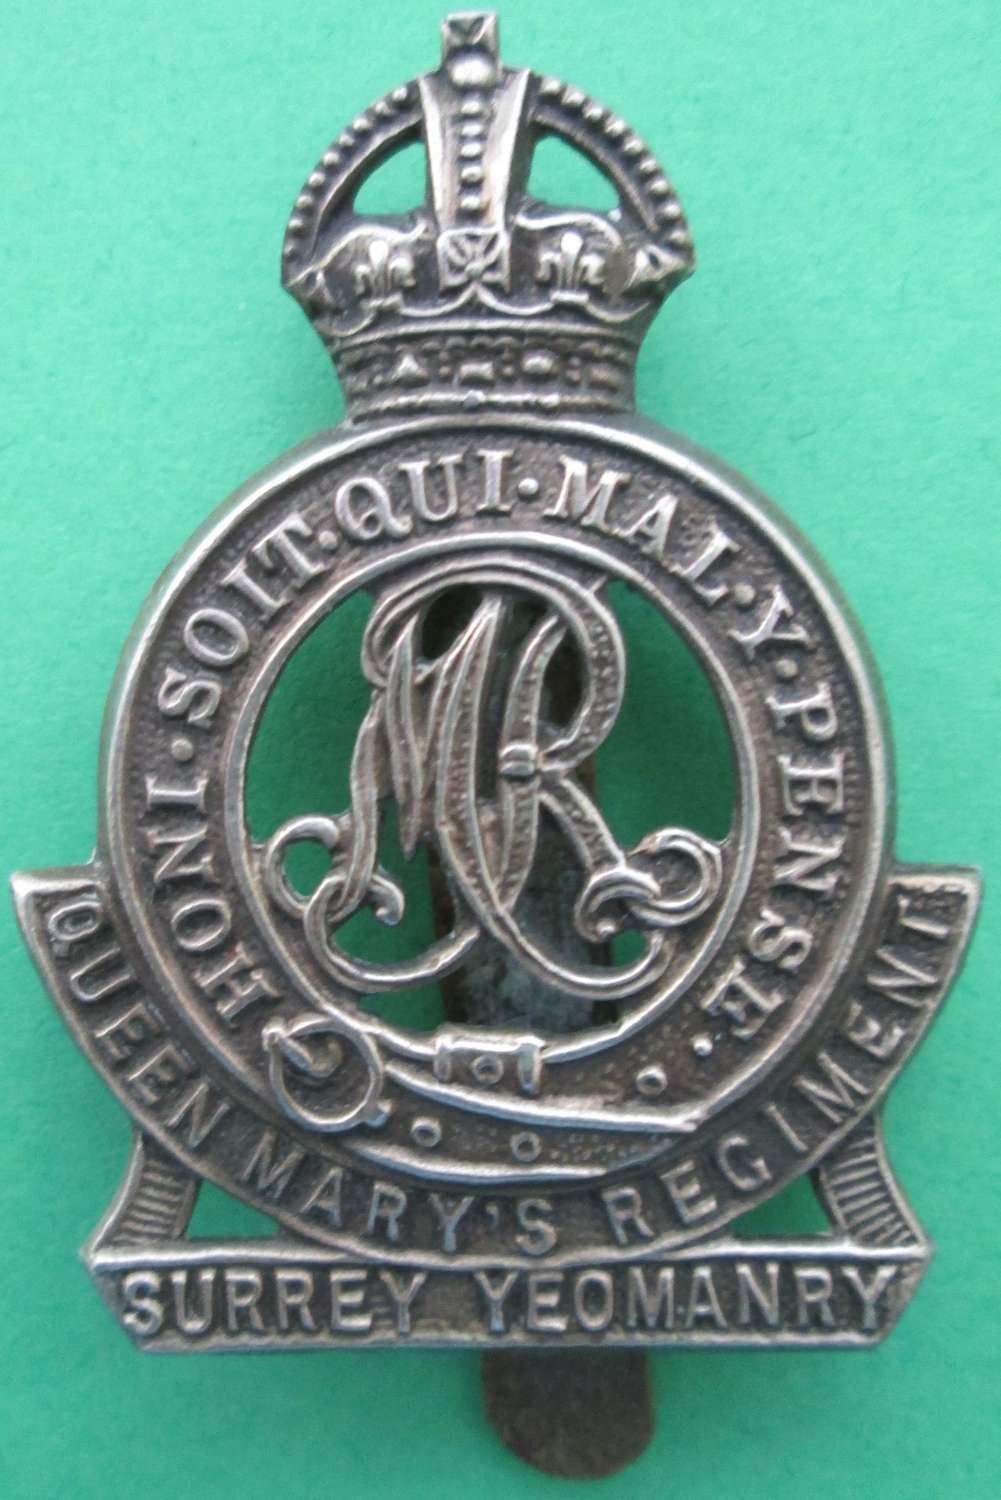 THE QUEEN MARY'S SURREY YEOMANRY (LANCERS) CAP BADGE